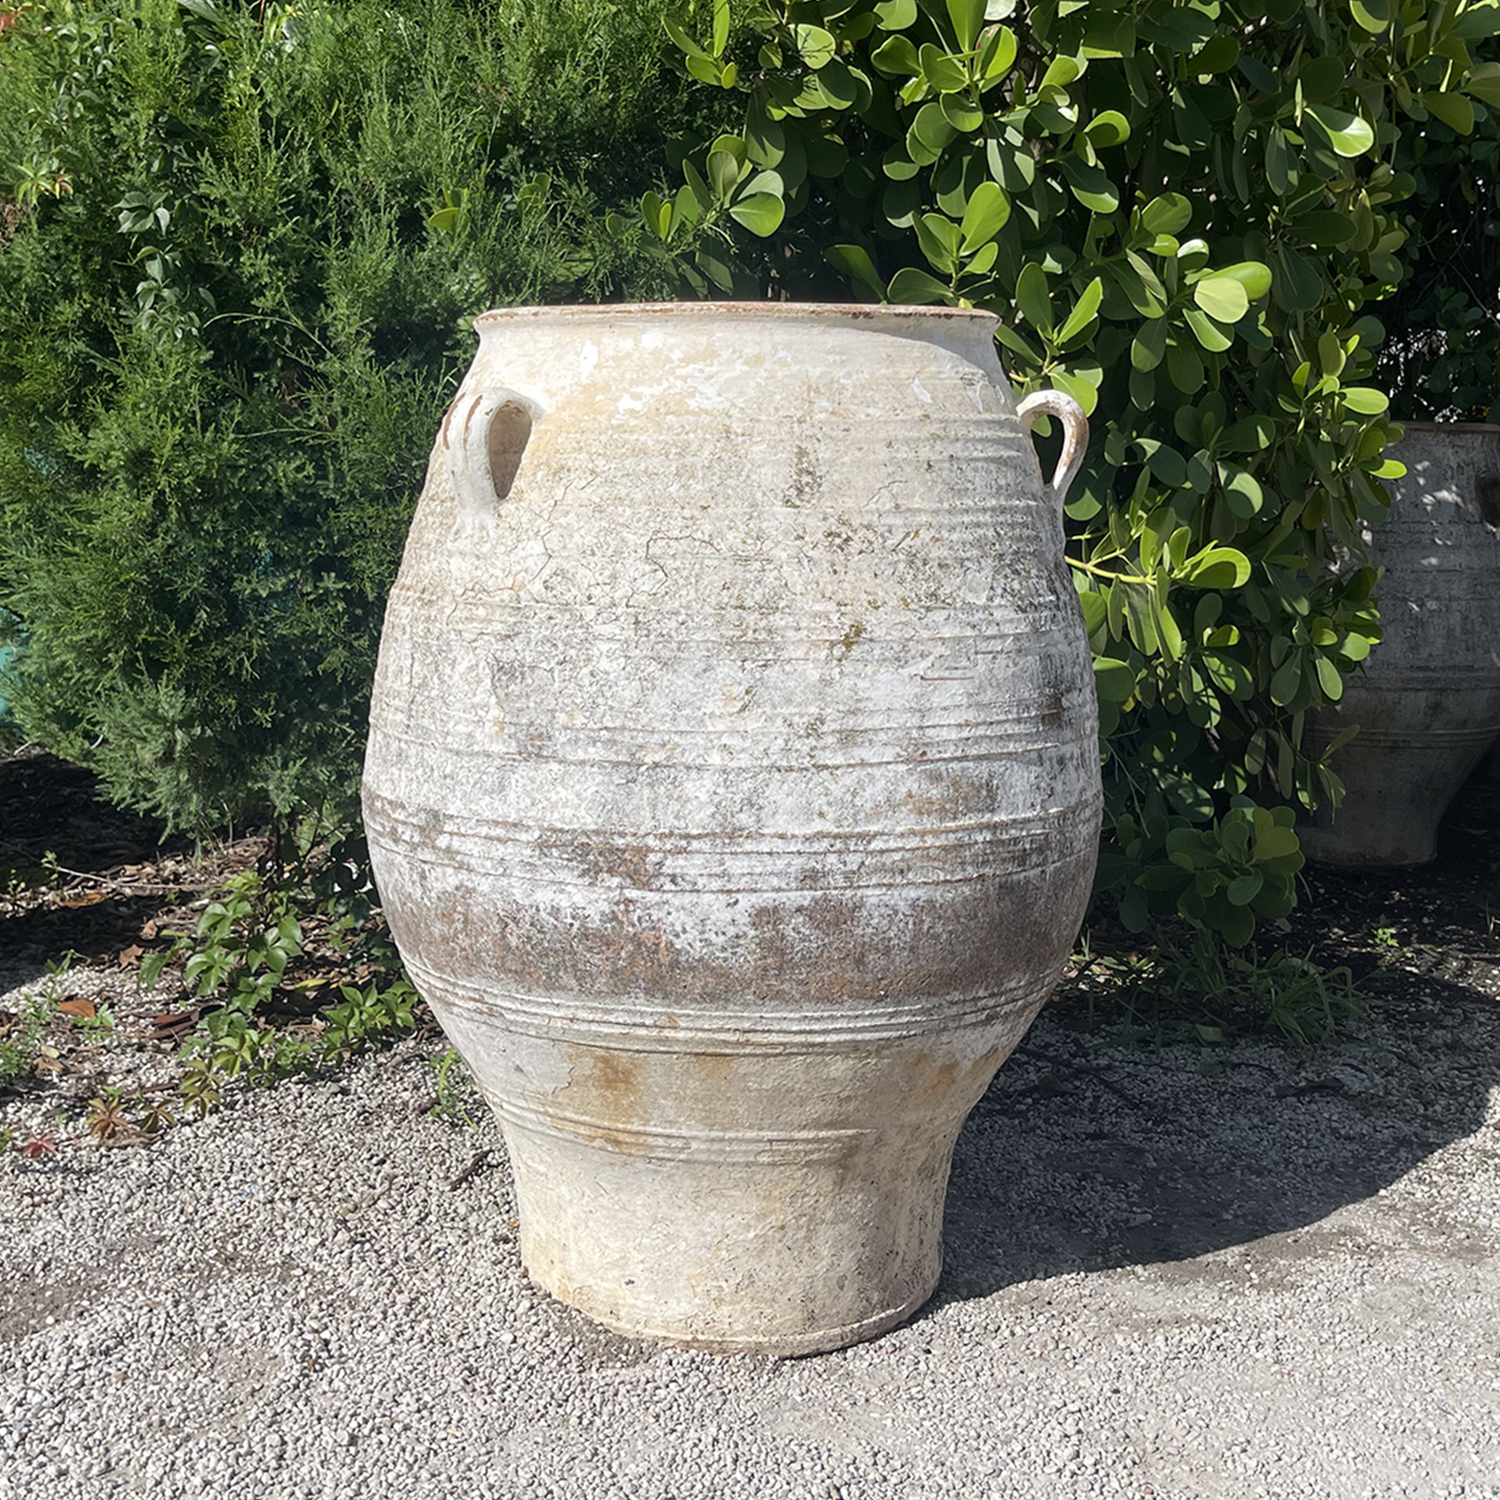 19th Century Handcrafted Terracotta Olive Oil Jar from Greece